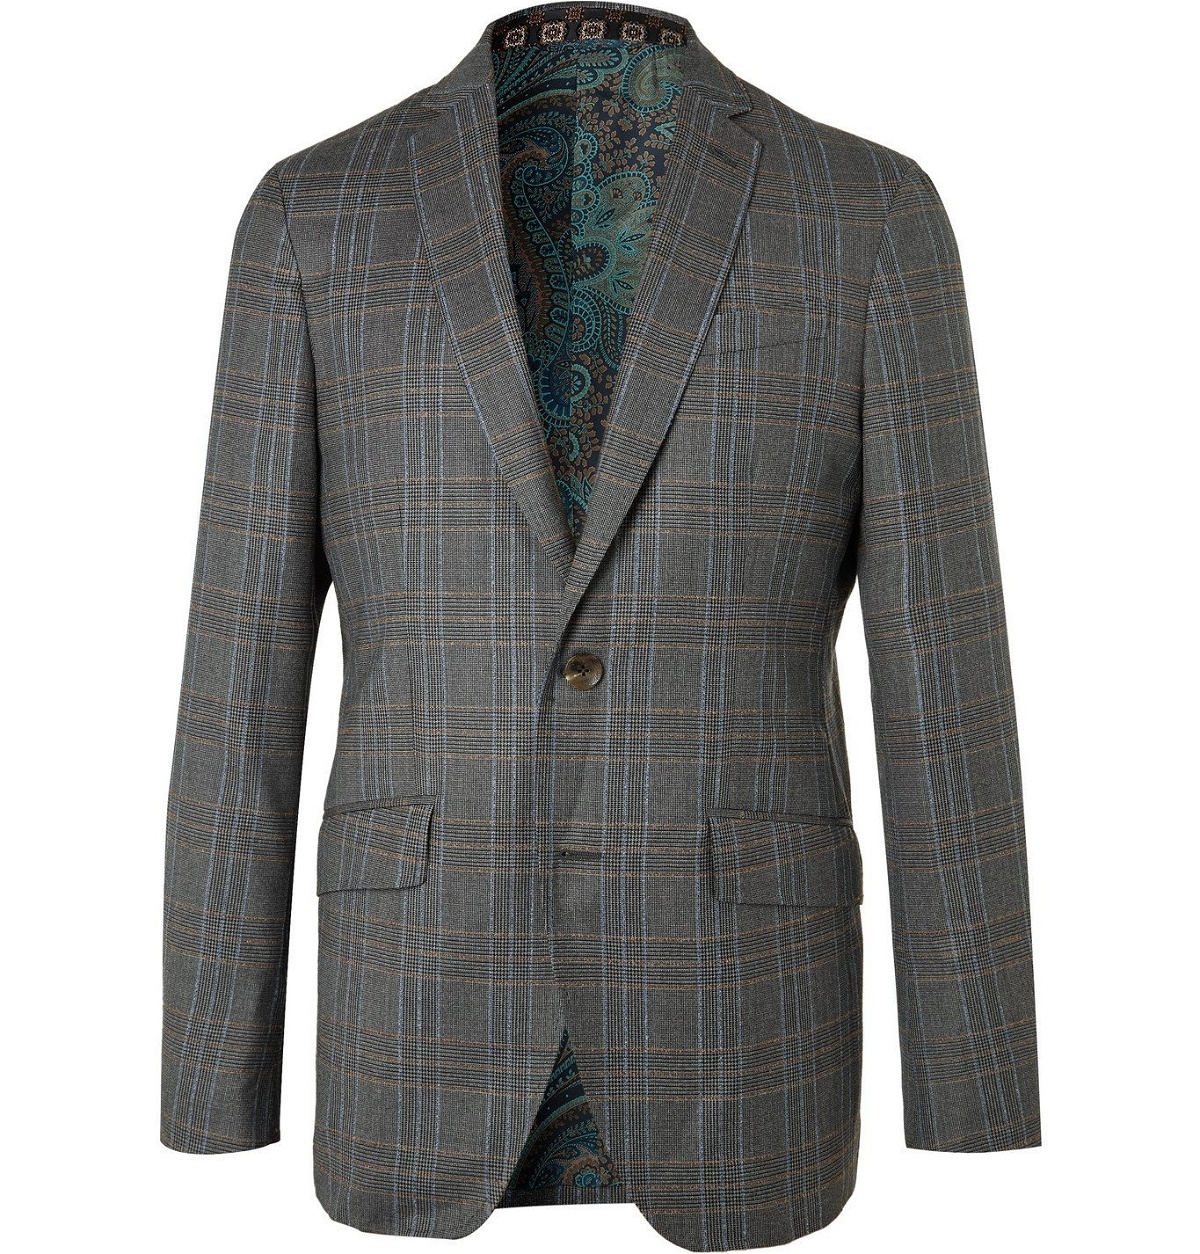 Etro - Prince of Wales Checked Wool Suit Jacket - Gray Etro